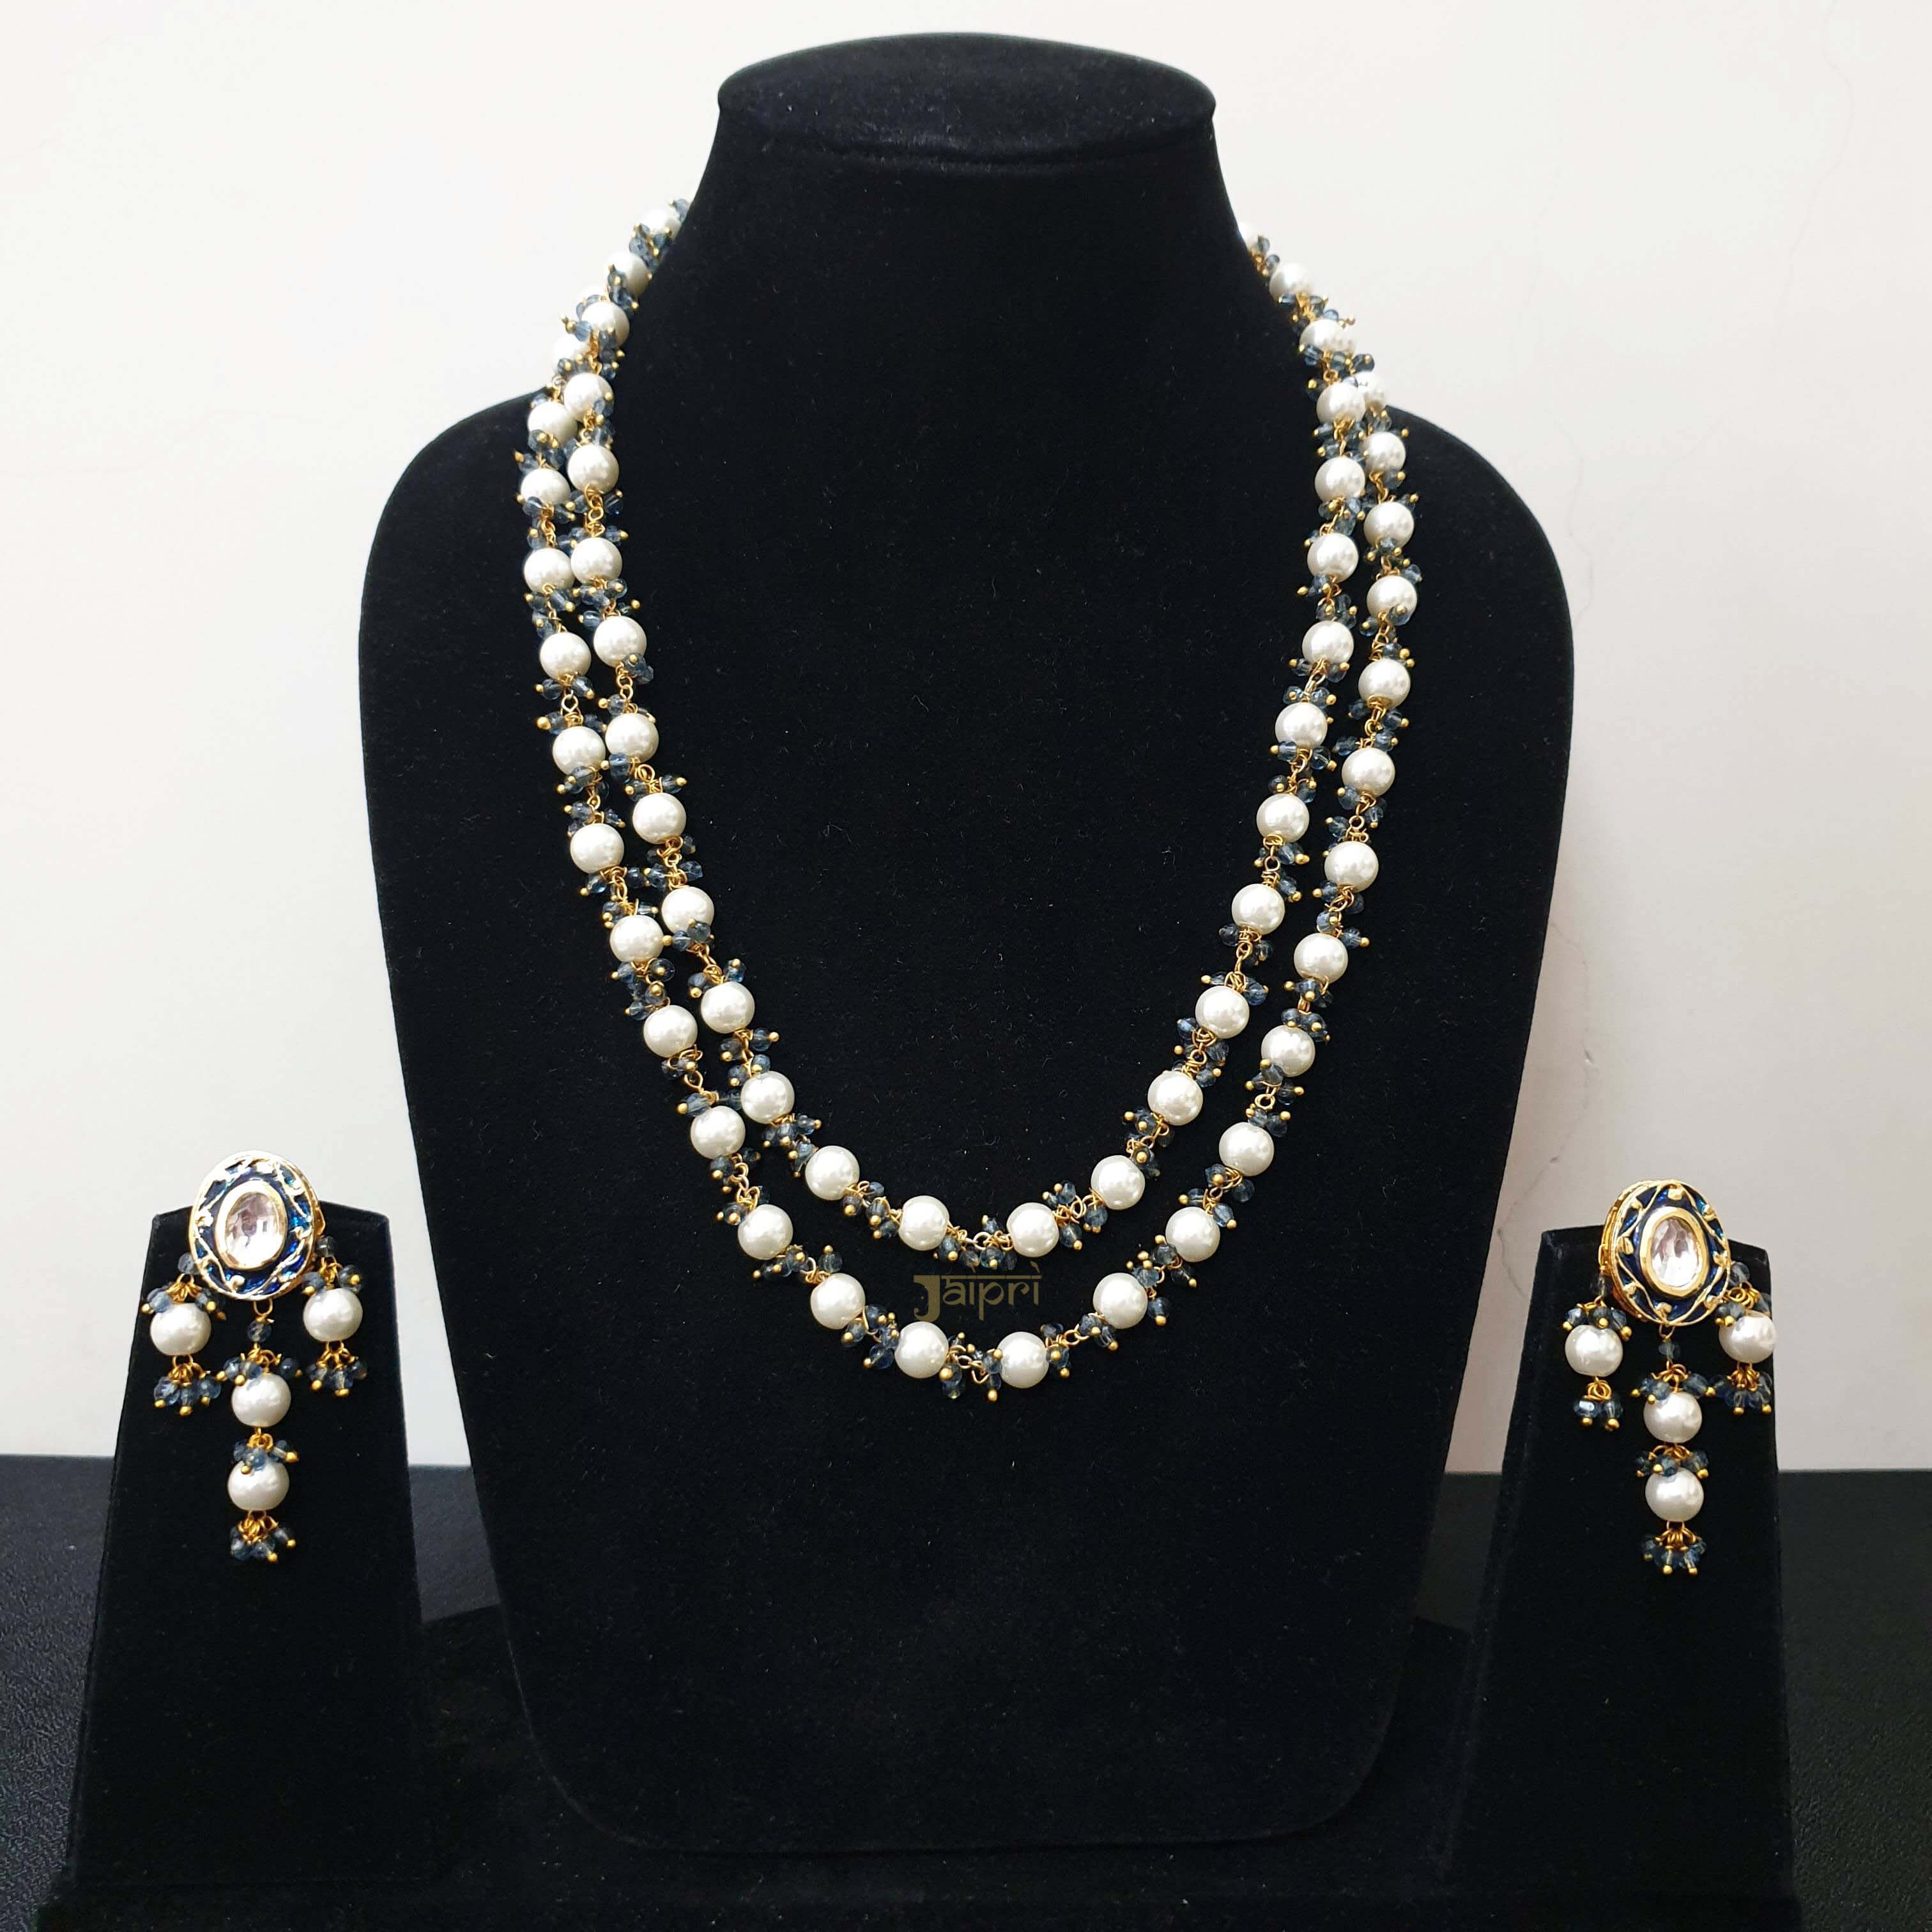 Premium Pearl And Dark Blue Beads Necklace With Earrings